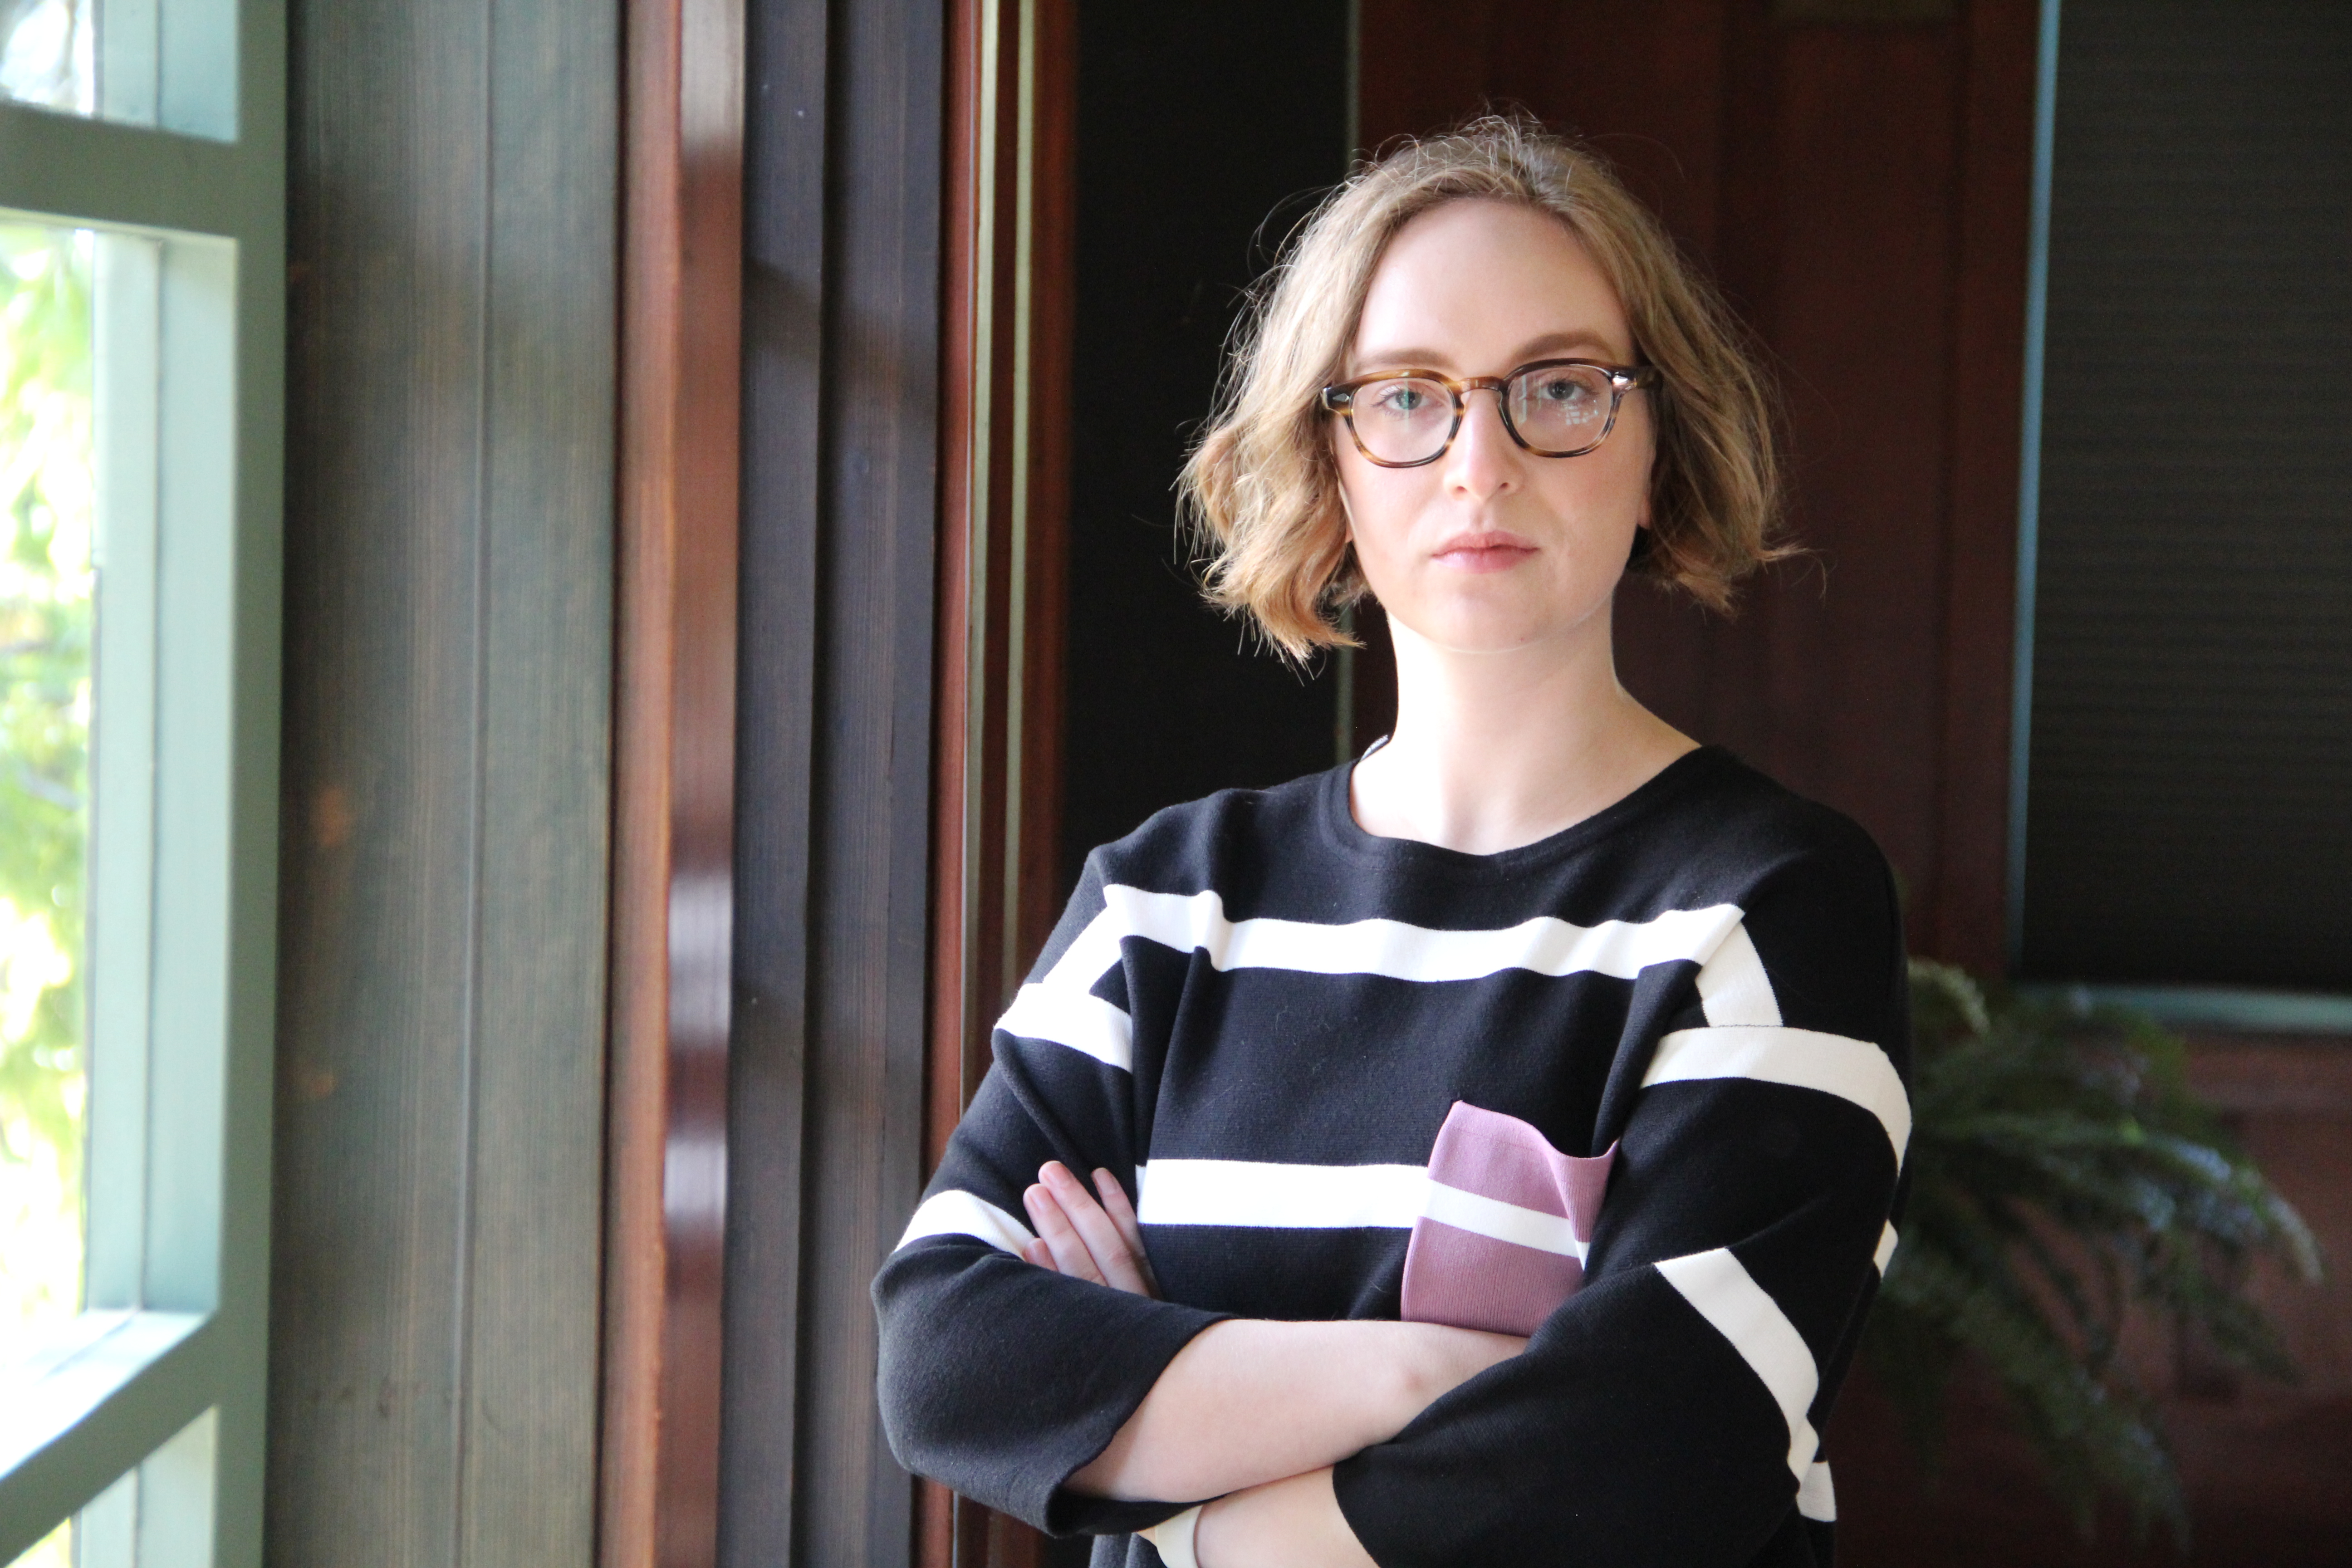 Sarah Powazek, program director of public interest security at the UC Berkeley Center for Long-Term Cybersecurity, looks at the camera with a serious expression on her face, her arms crossed.